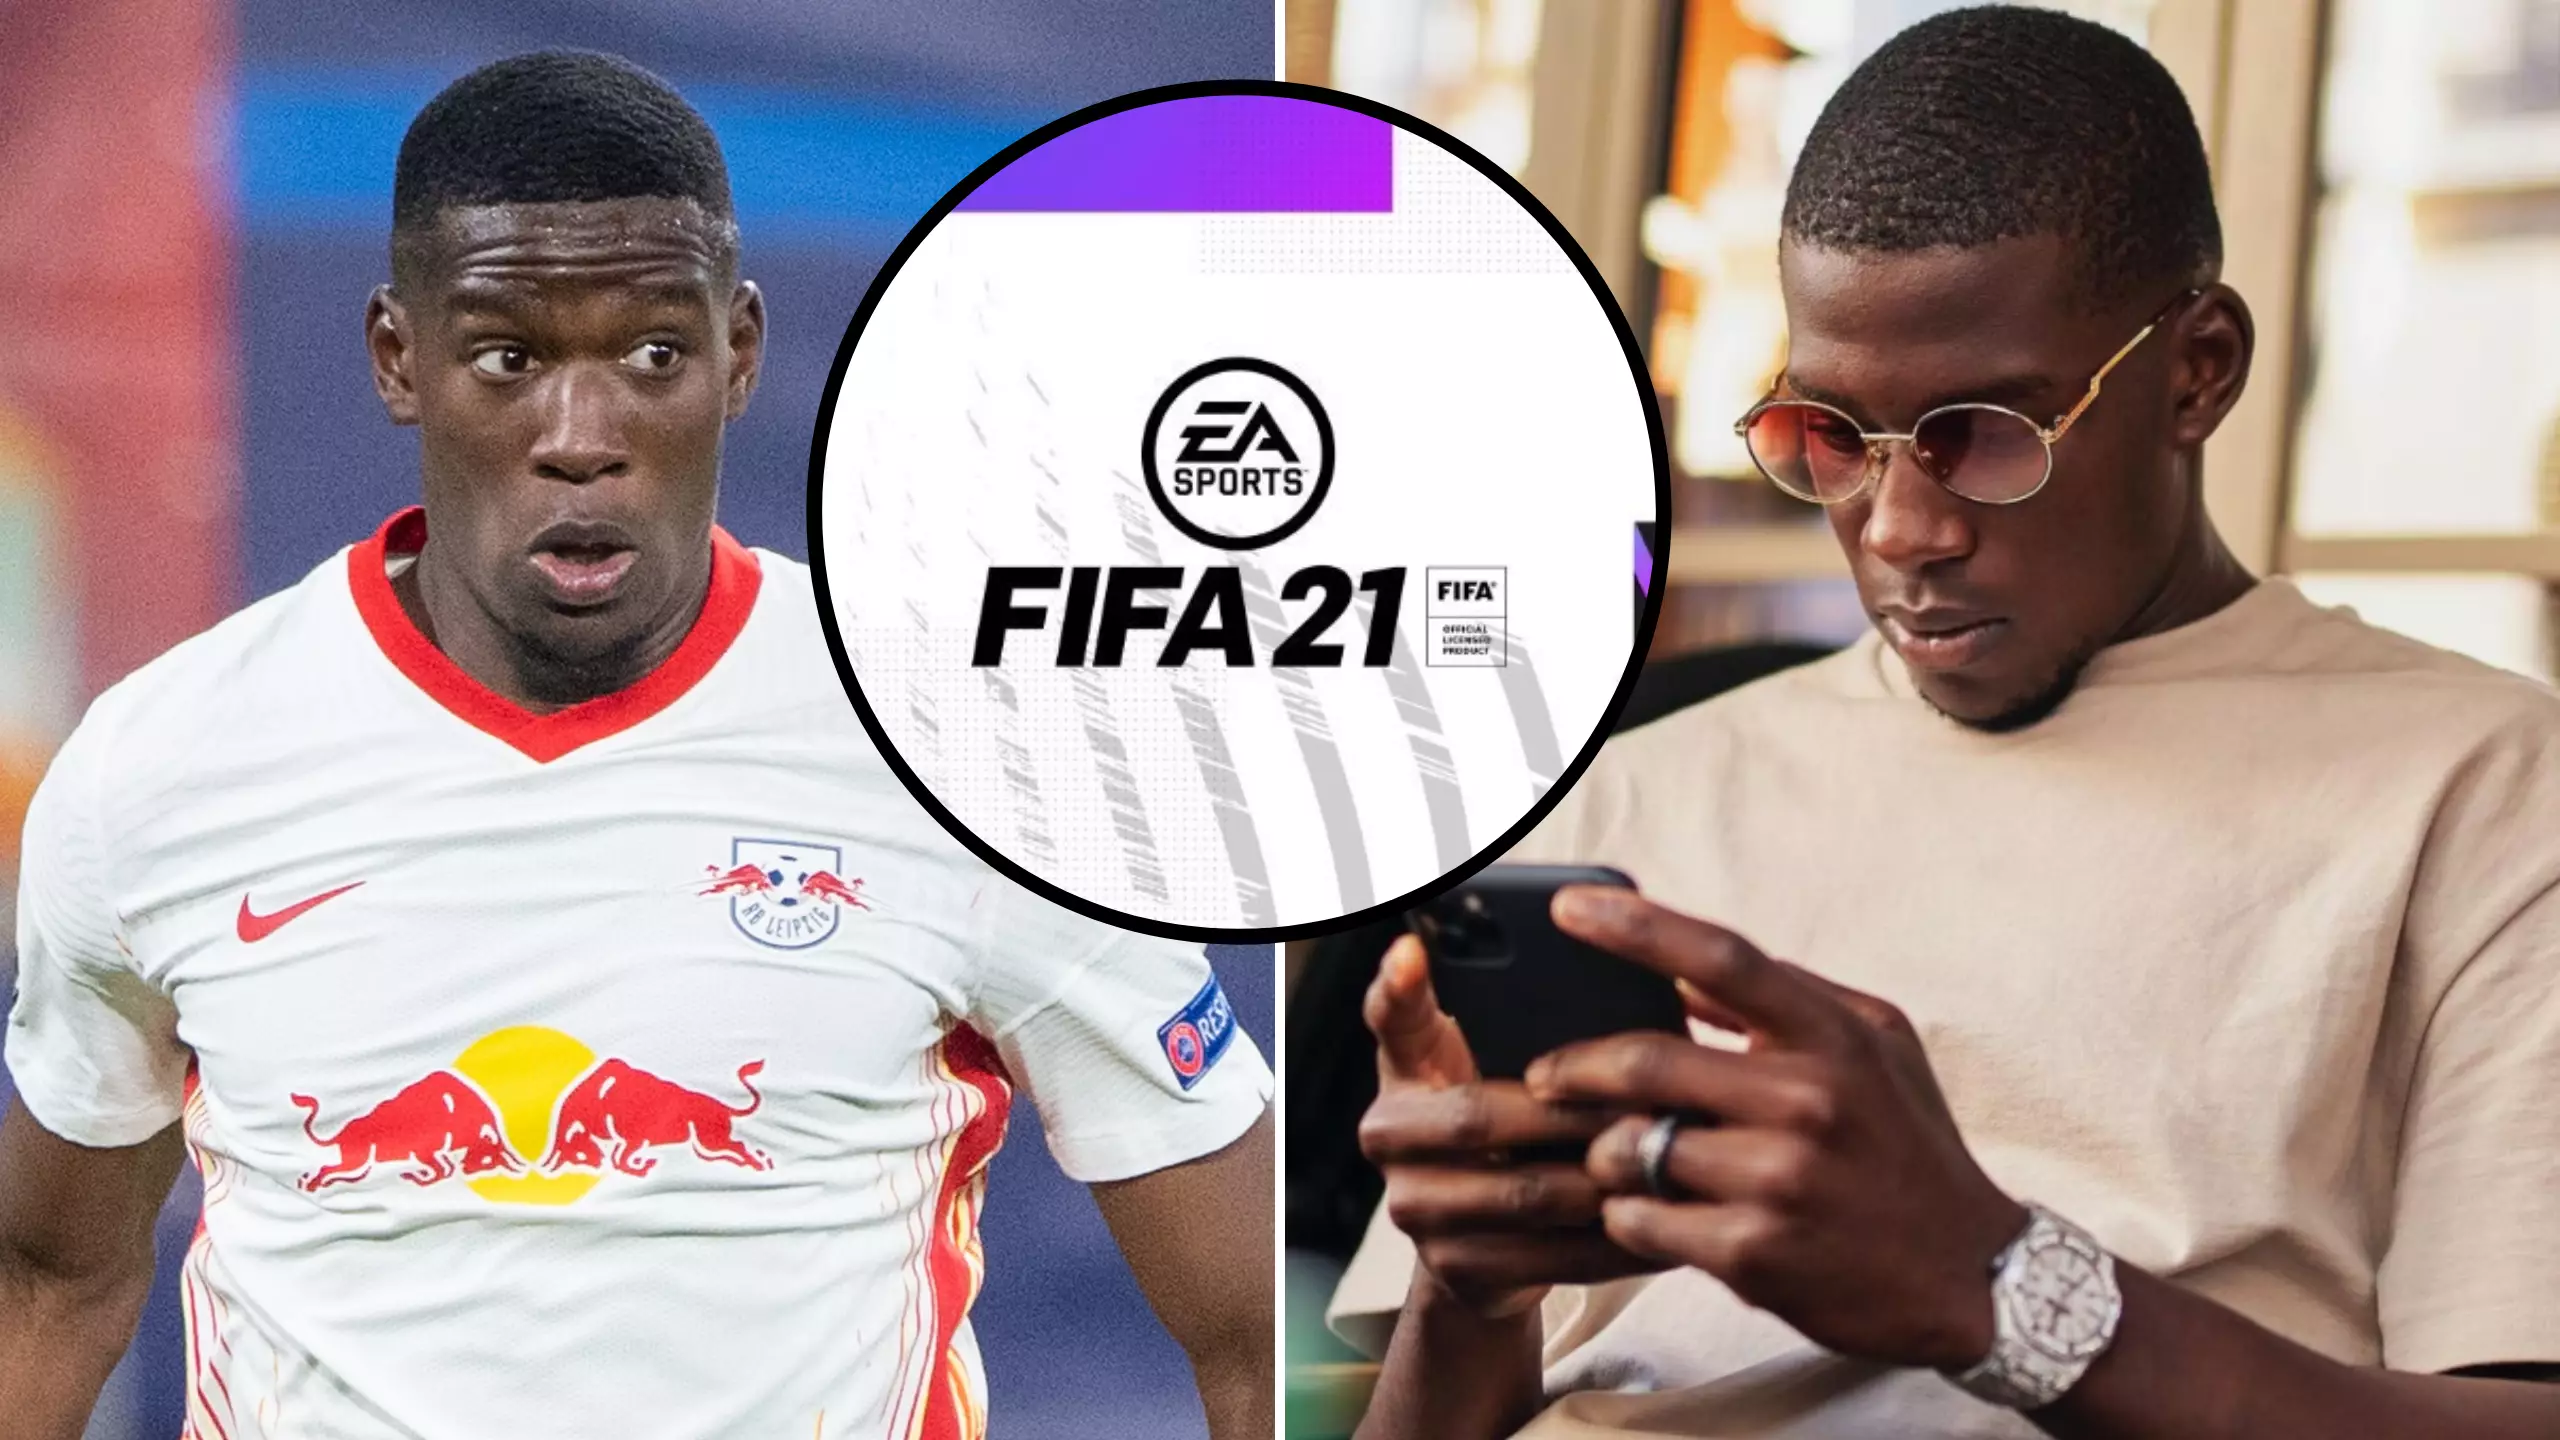 RB Leipzig's Nordi Mukiele Demands Major Changes To FIFA 21 From EA Sports